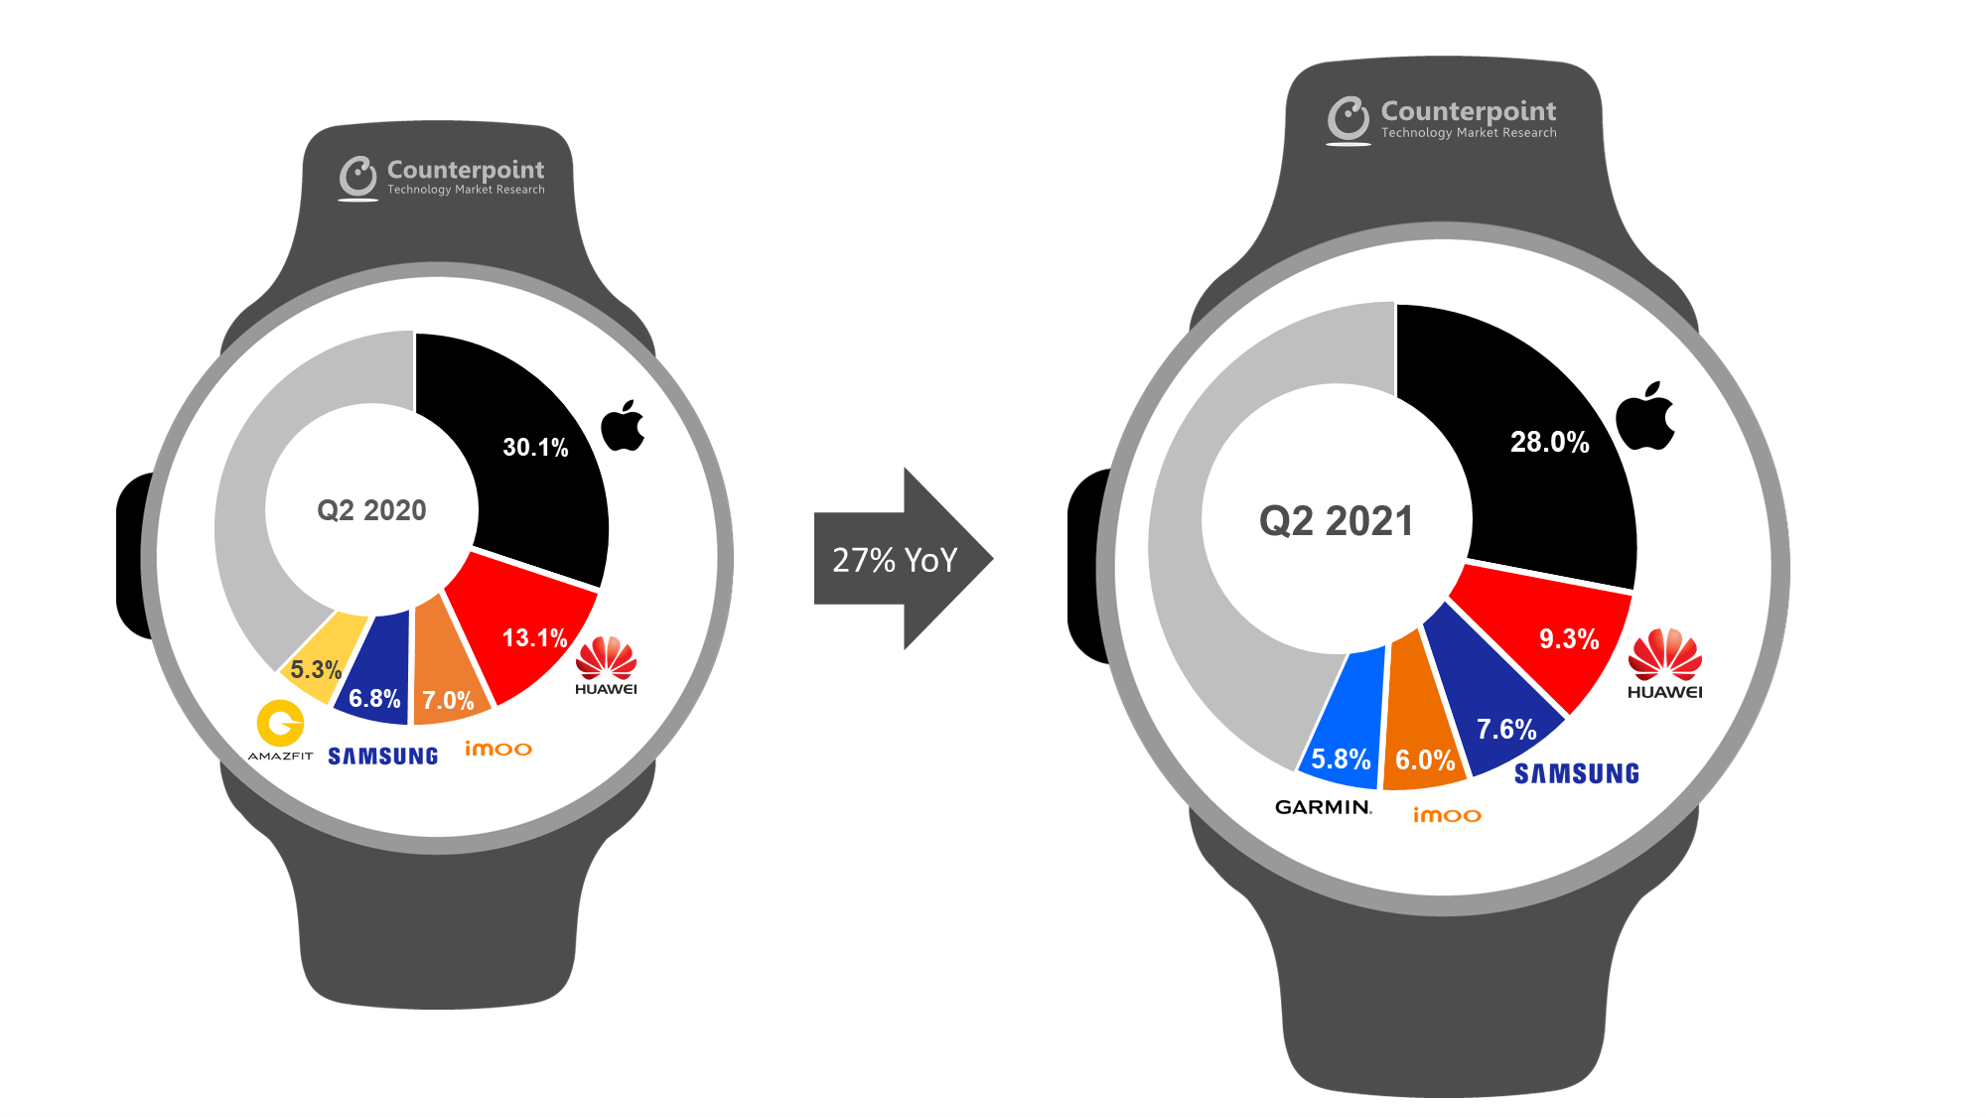 Counterpoint Research Shipments of Global Top 5 Smartwatch OEMs Q2 2021 vs Q2 2020